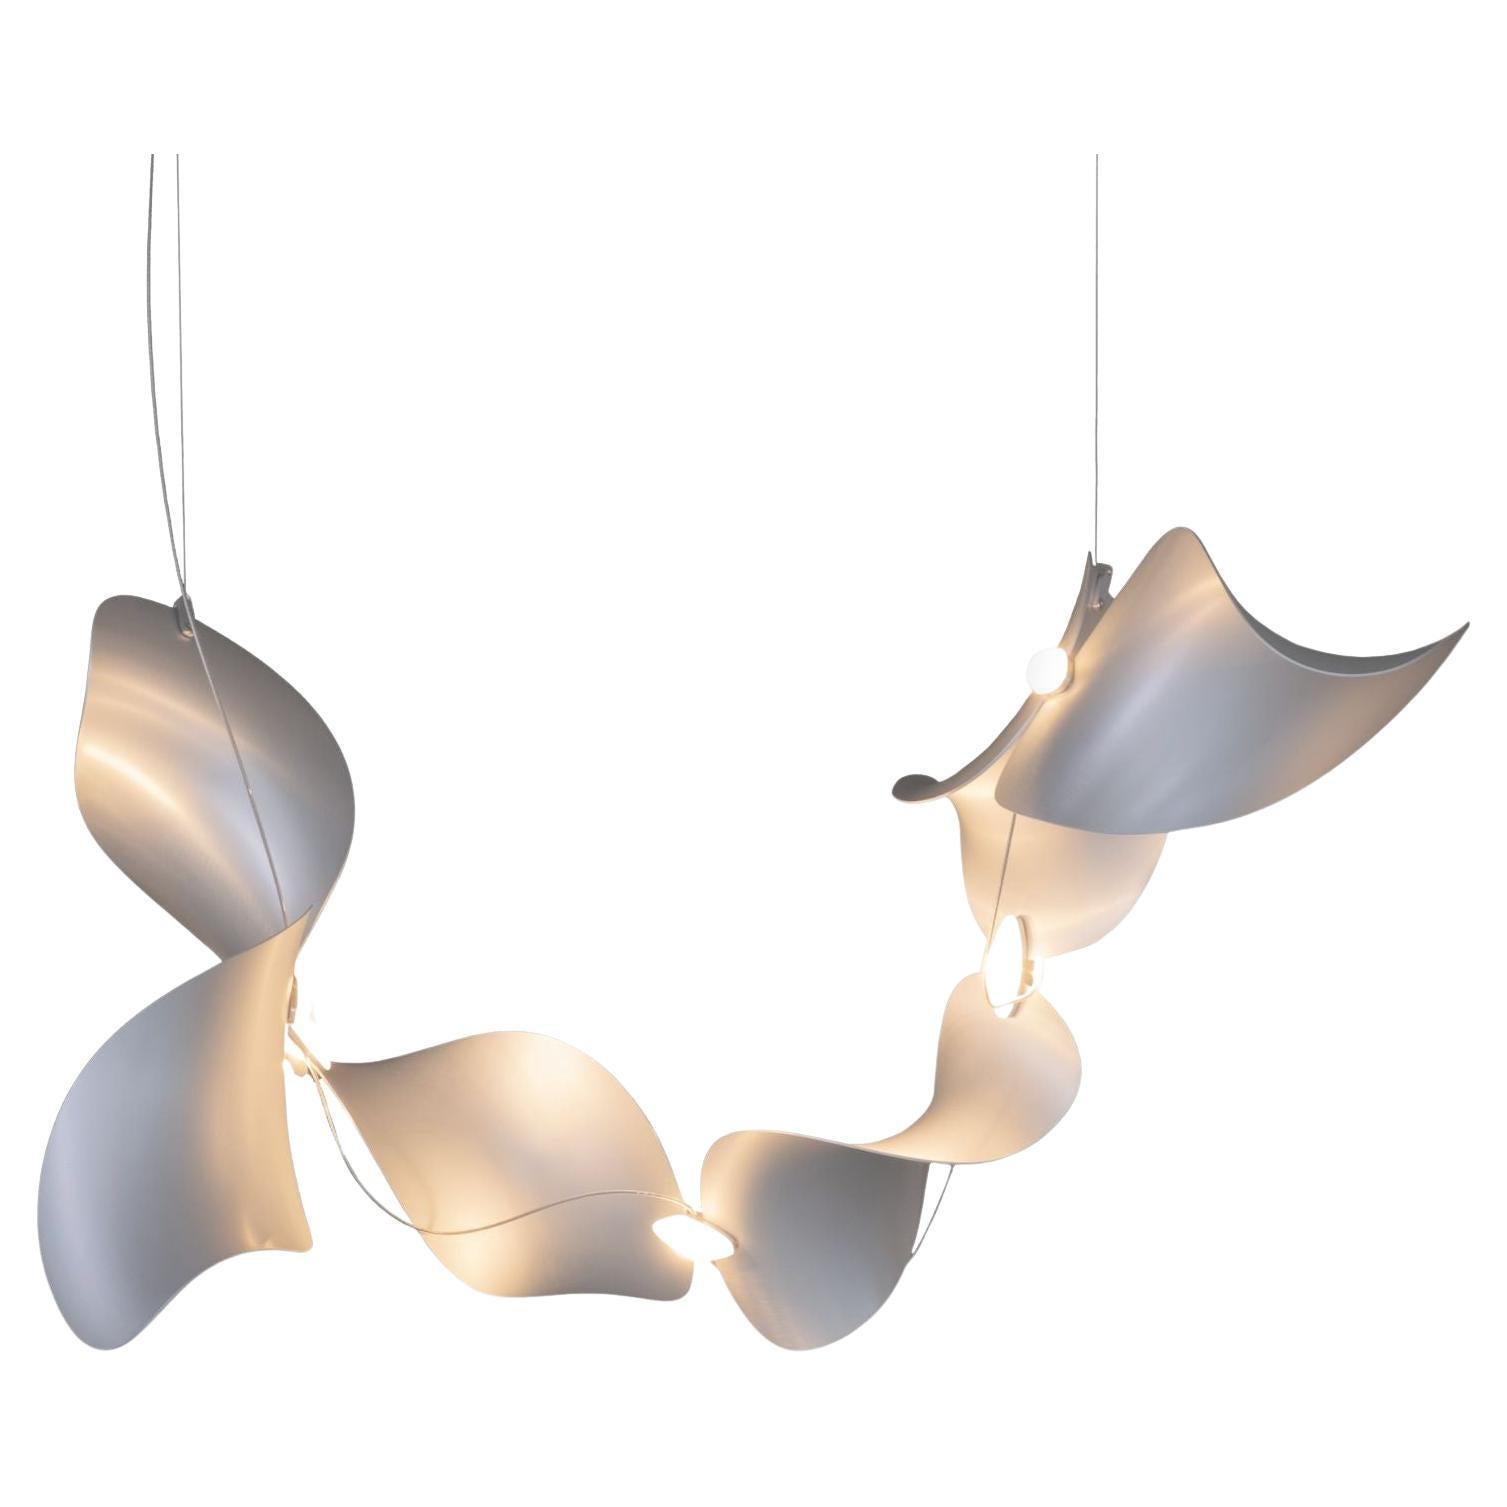 Daniel Becker 'Dune 6' Suspension Lamp in Anodized Aluminum for Moss Objects For Sale